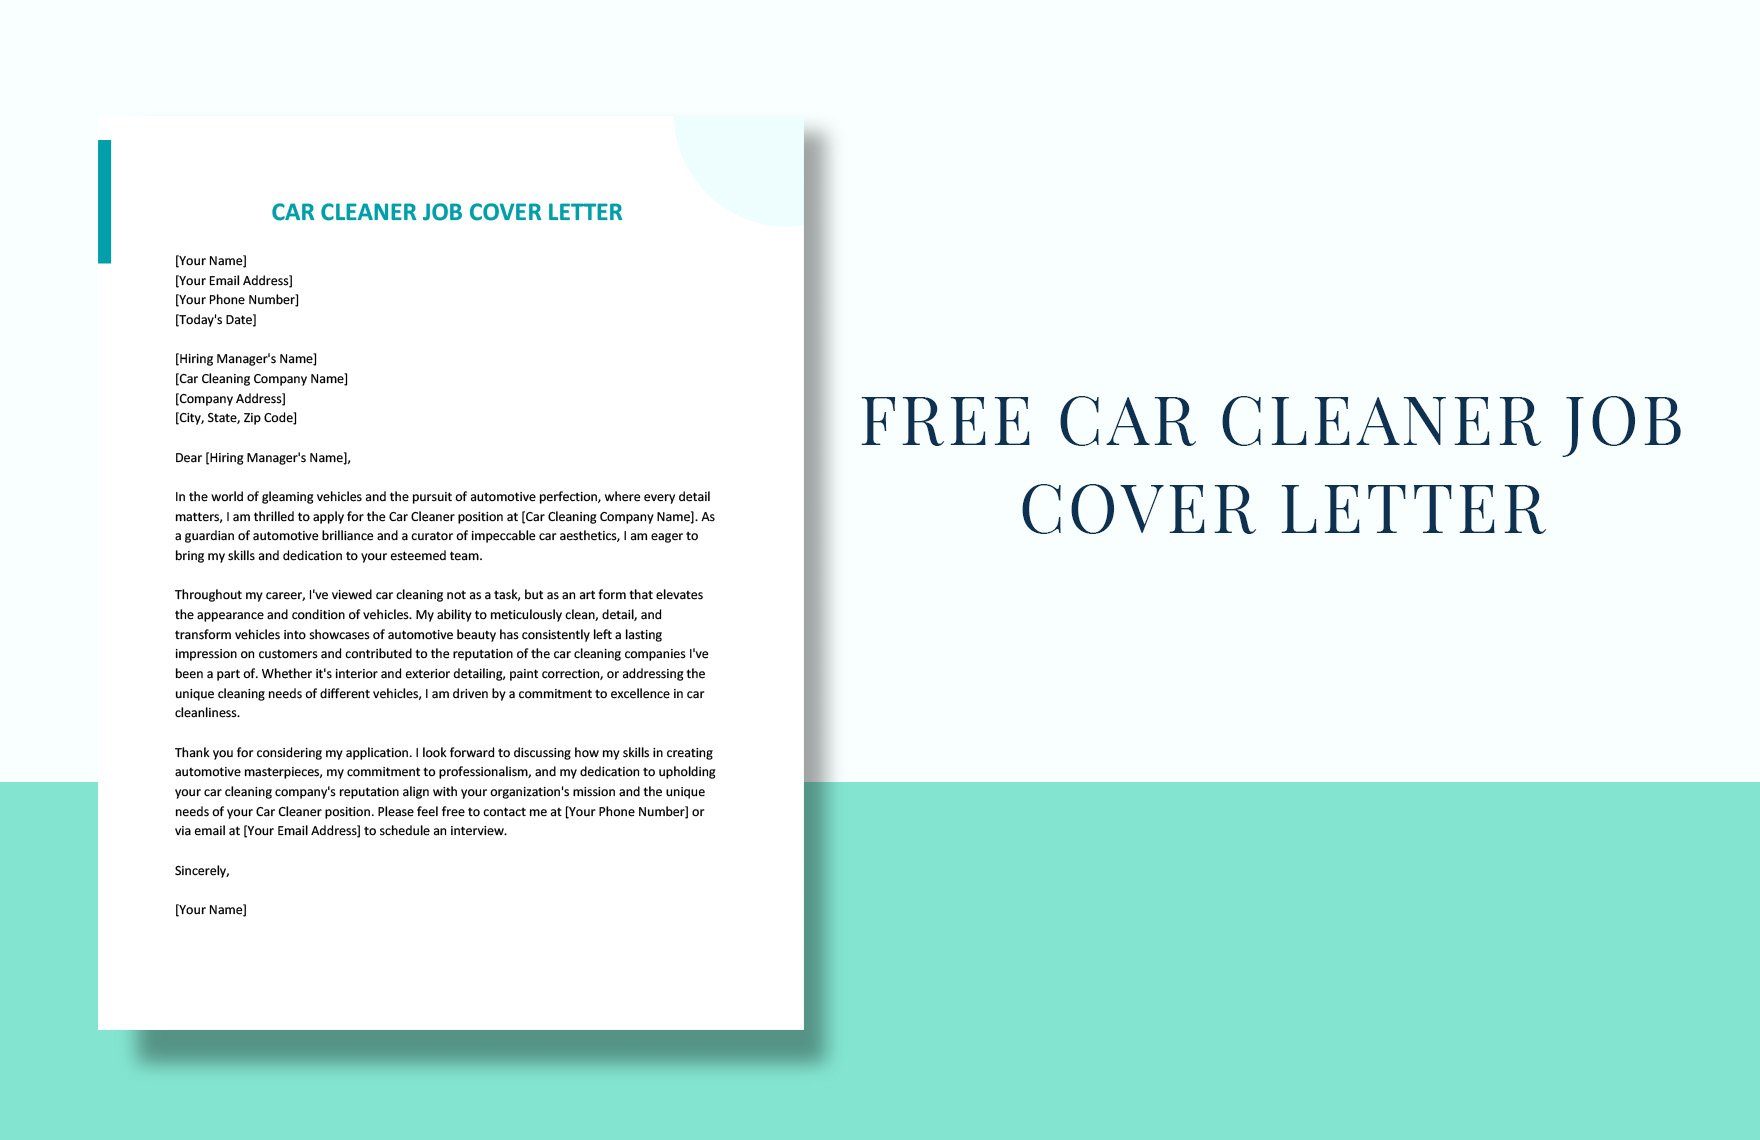 Car Cleaner Job Cover Letter in Word, Google Docs